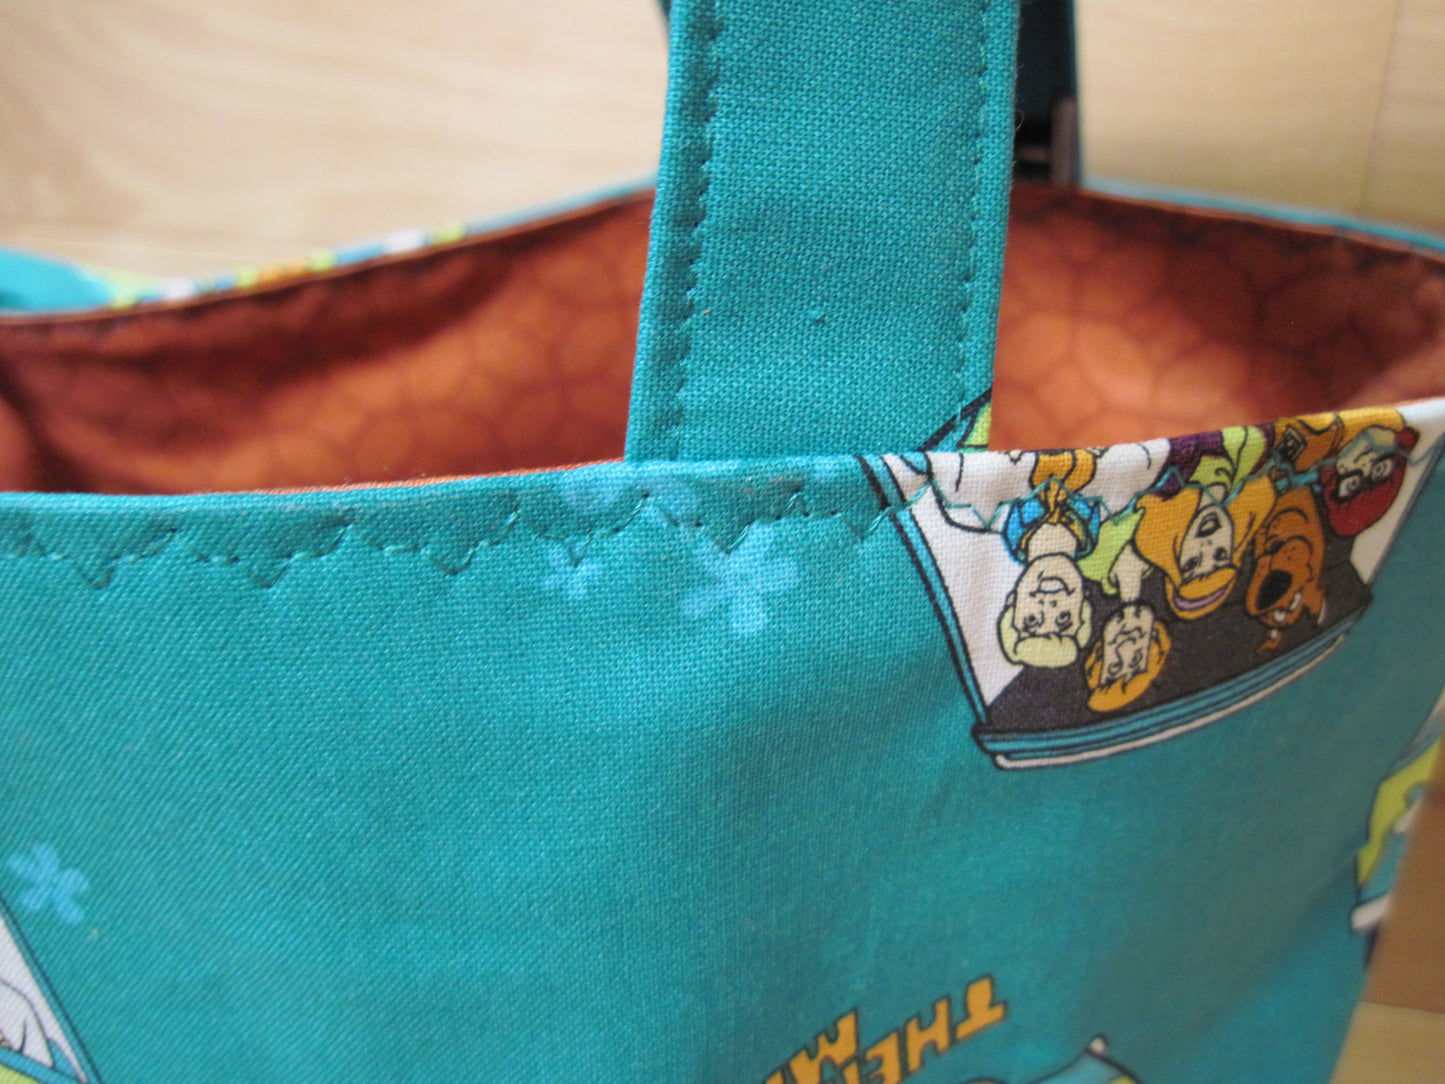 Scooby -Doo project bags